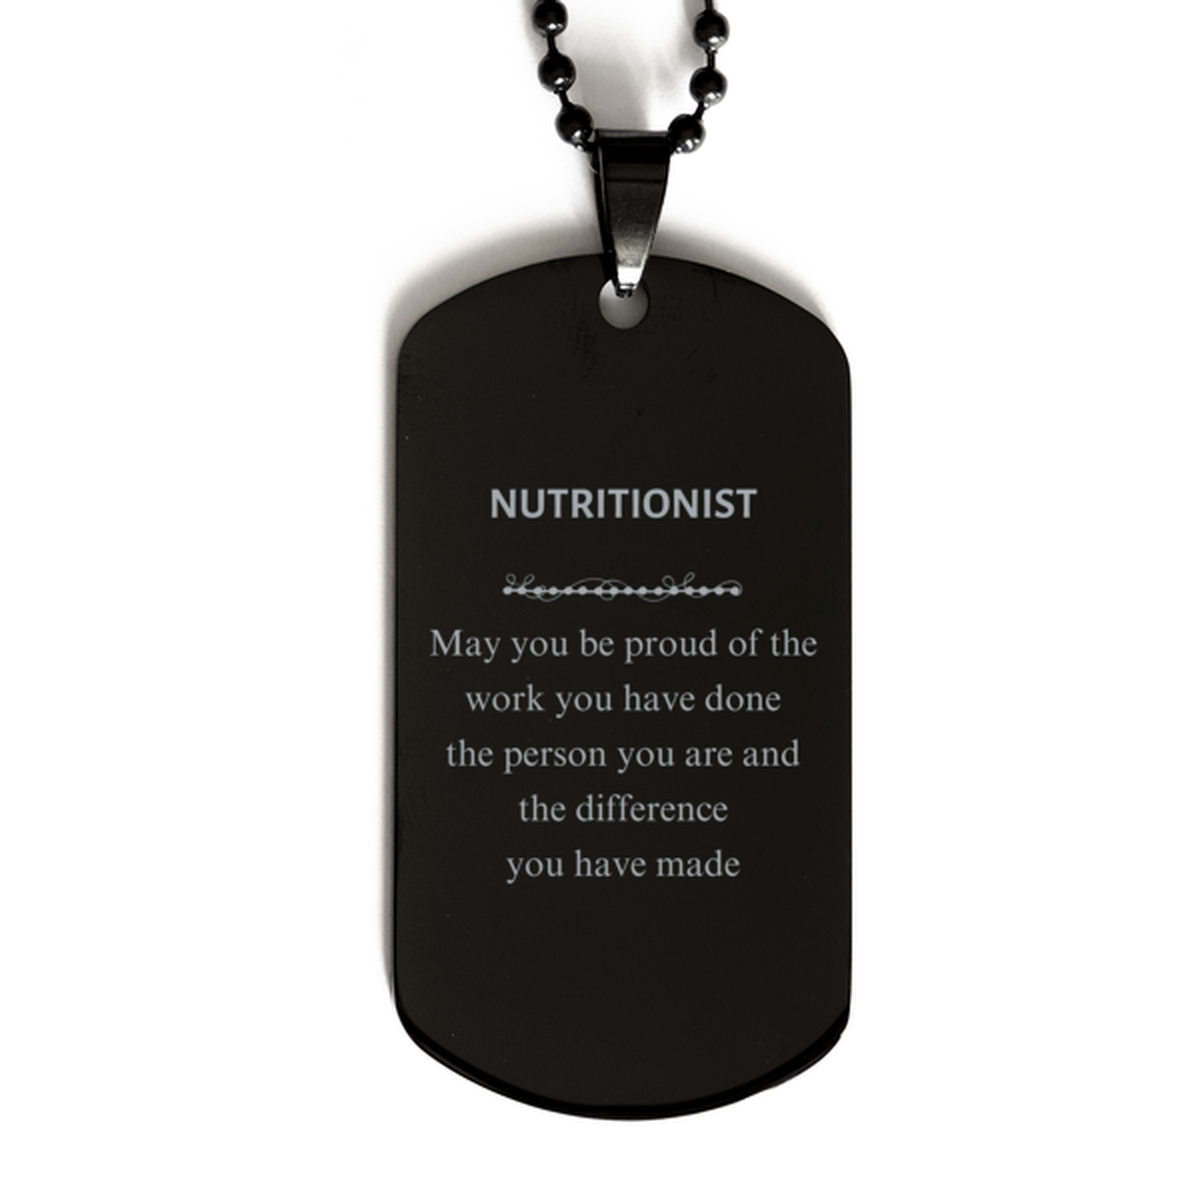 Nutritionist May you be proud of the work you have done, Retirement Nutritionist Black Dog Tag for Colleague Appreciation Gifts Amazing for Nutritionist